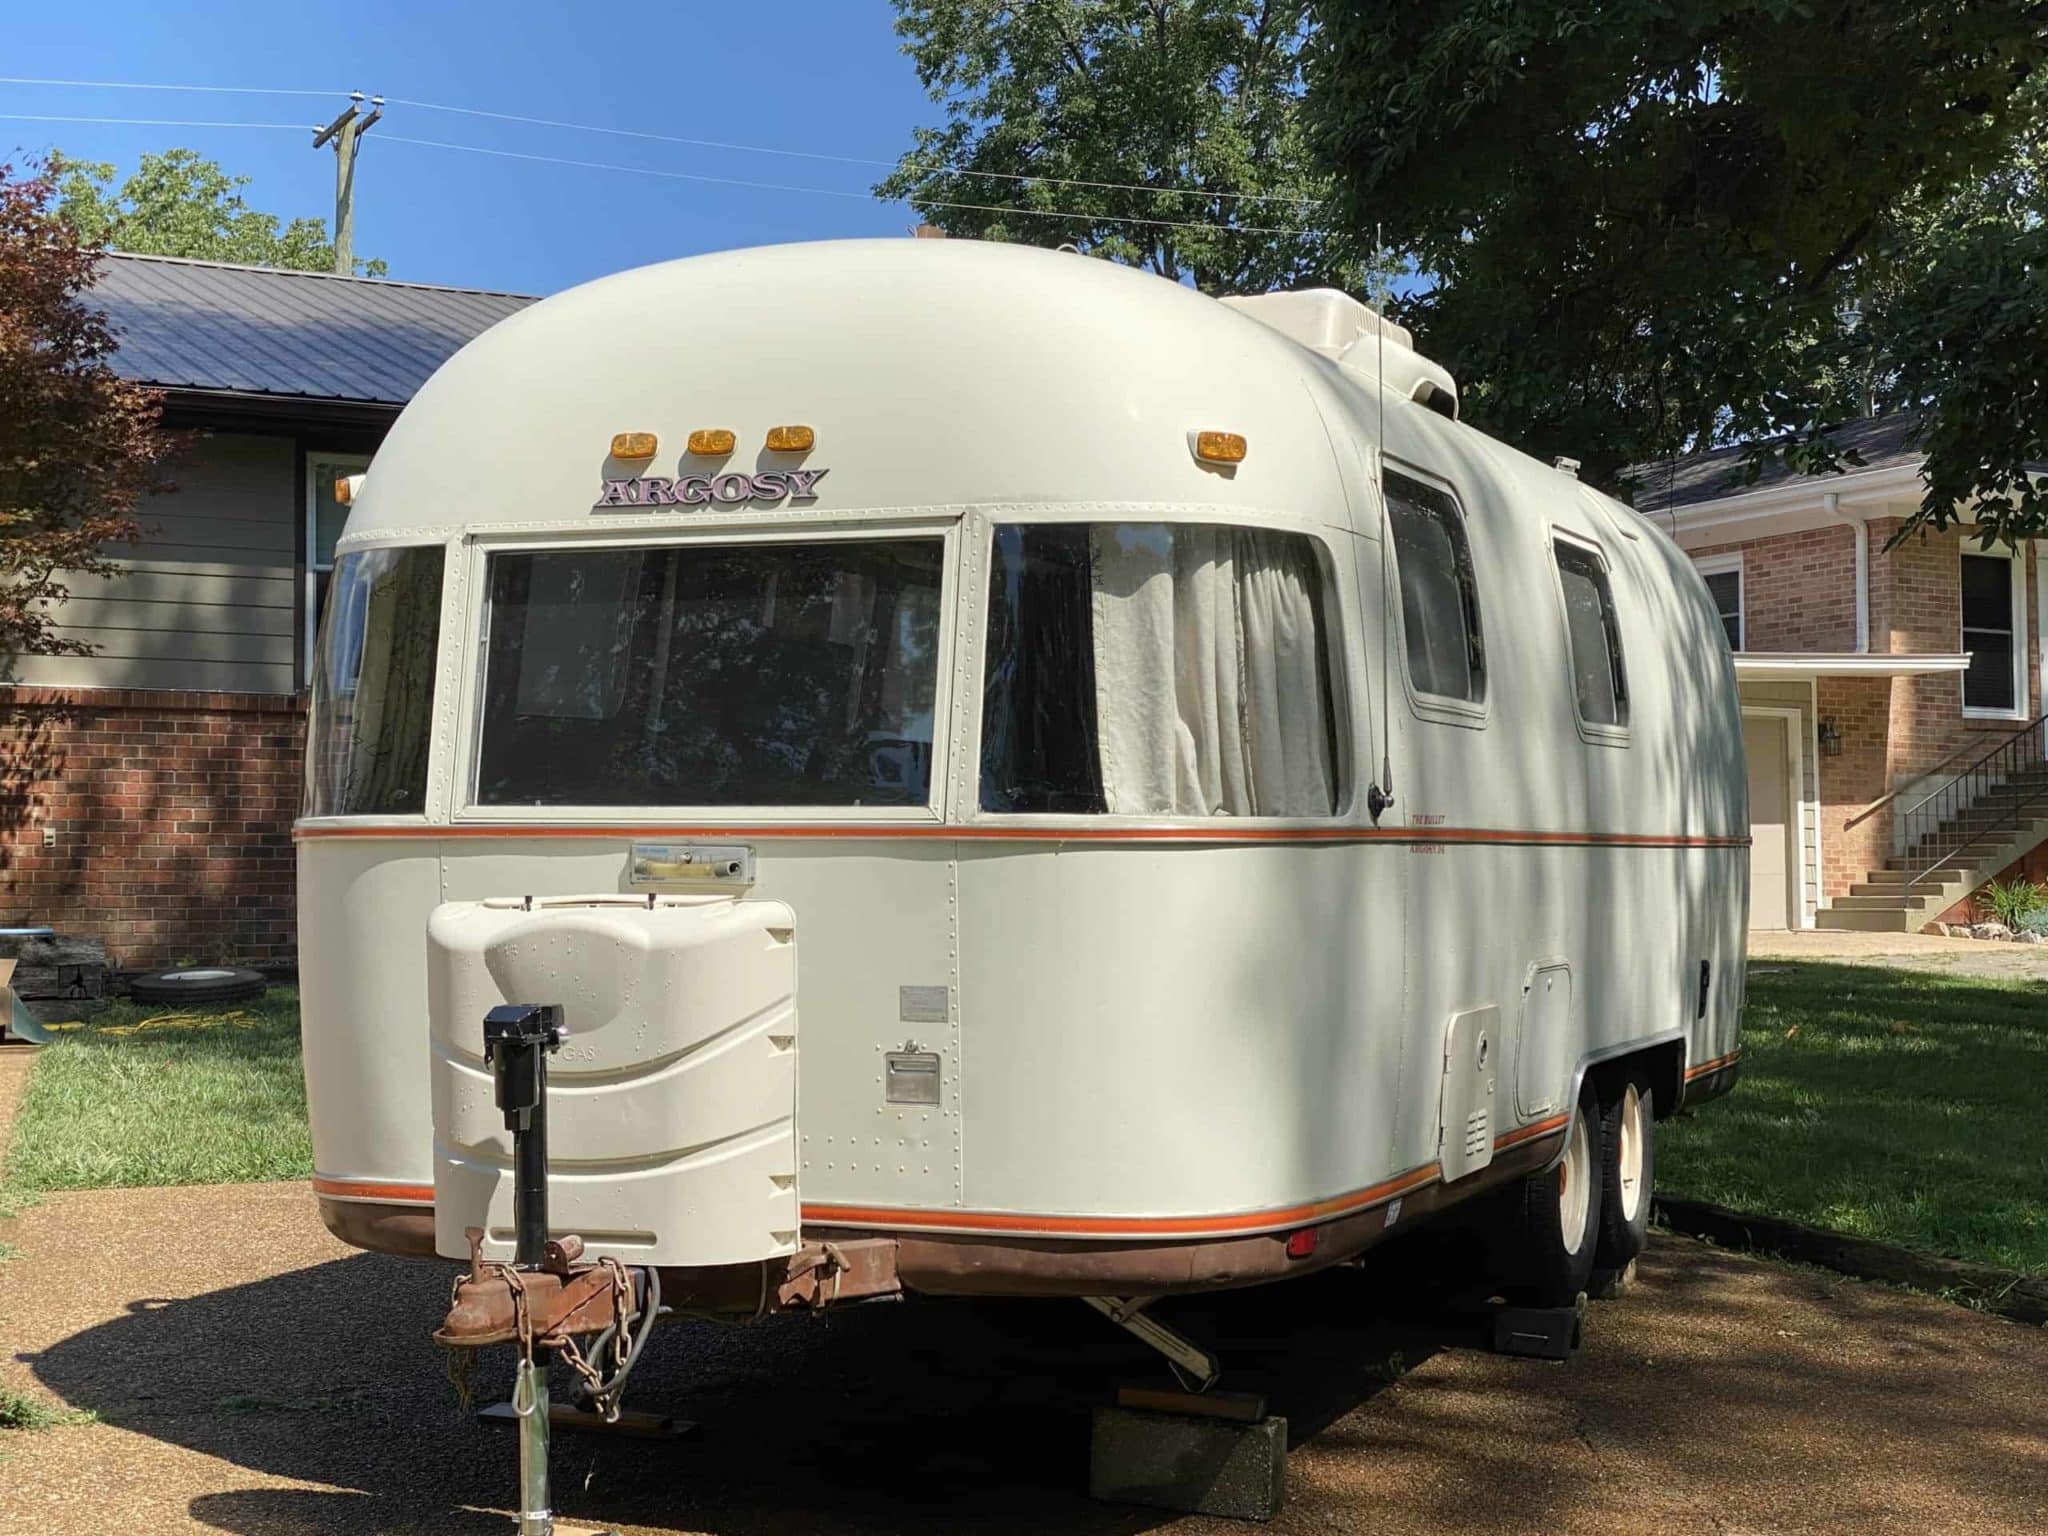 1977 Airstream 24FT Argosy Travel Trailers For Sale in Nashville Off Grid Campers For Sale Near Me